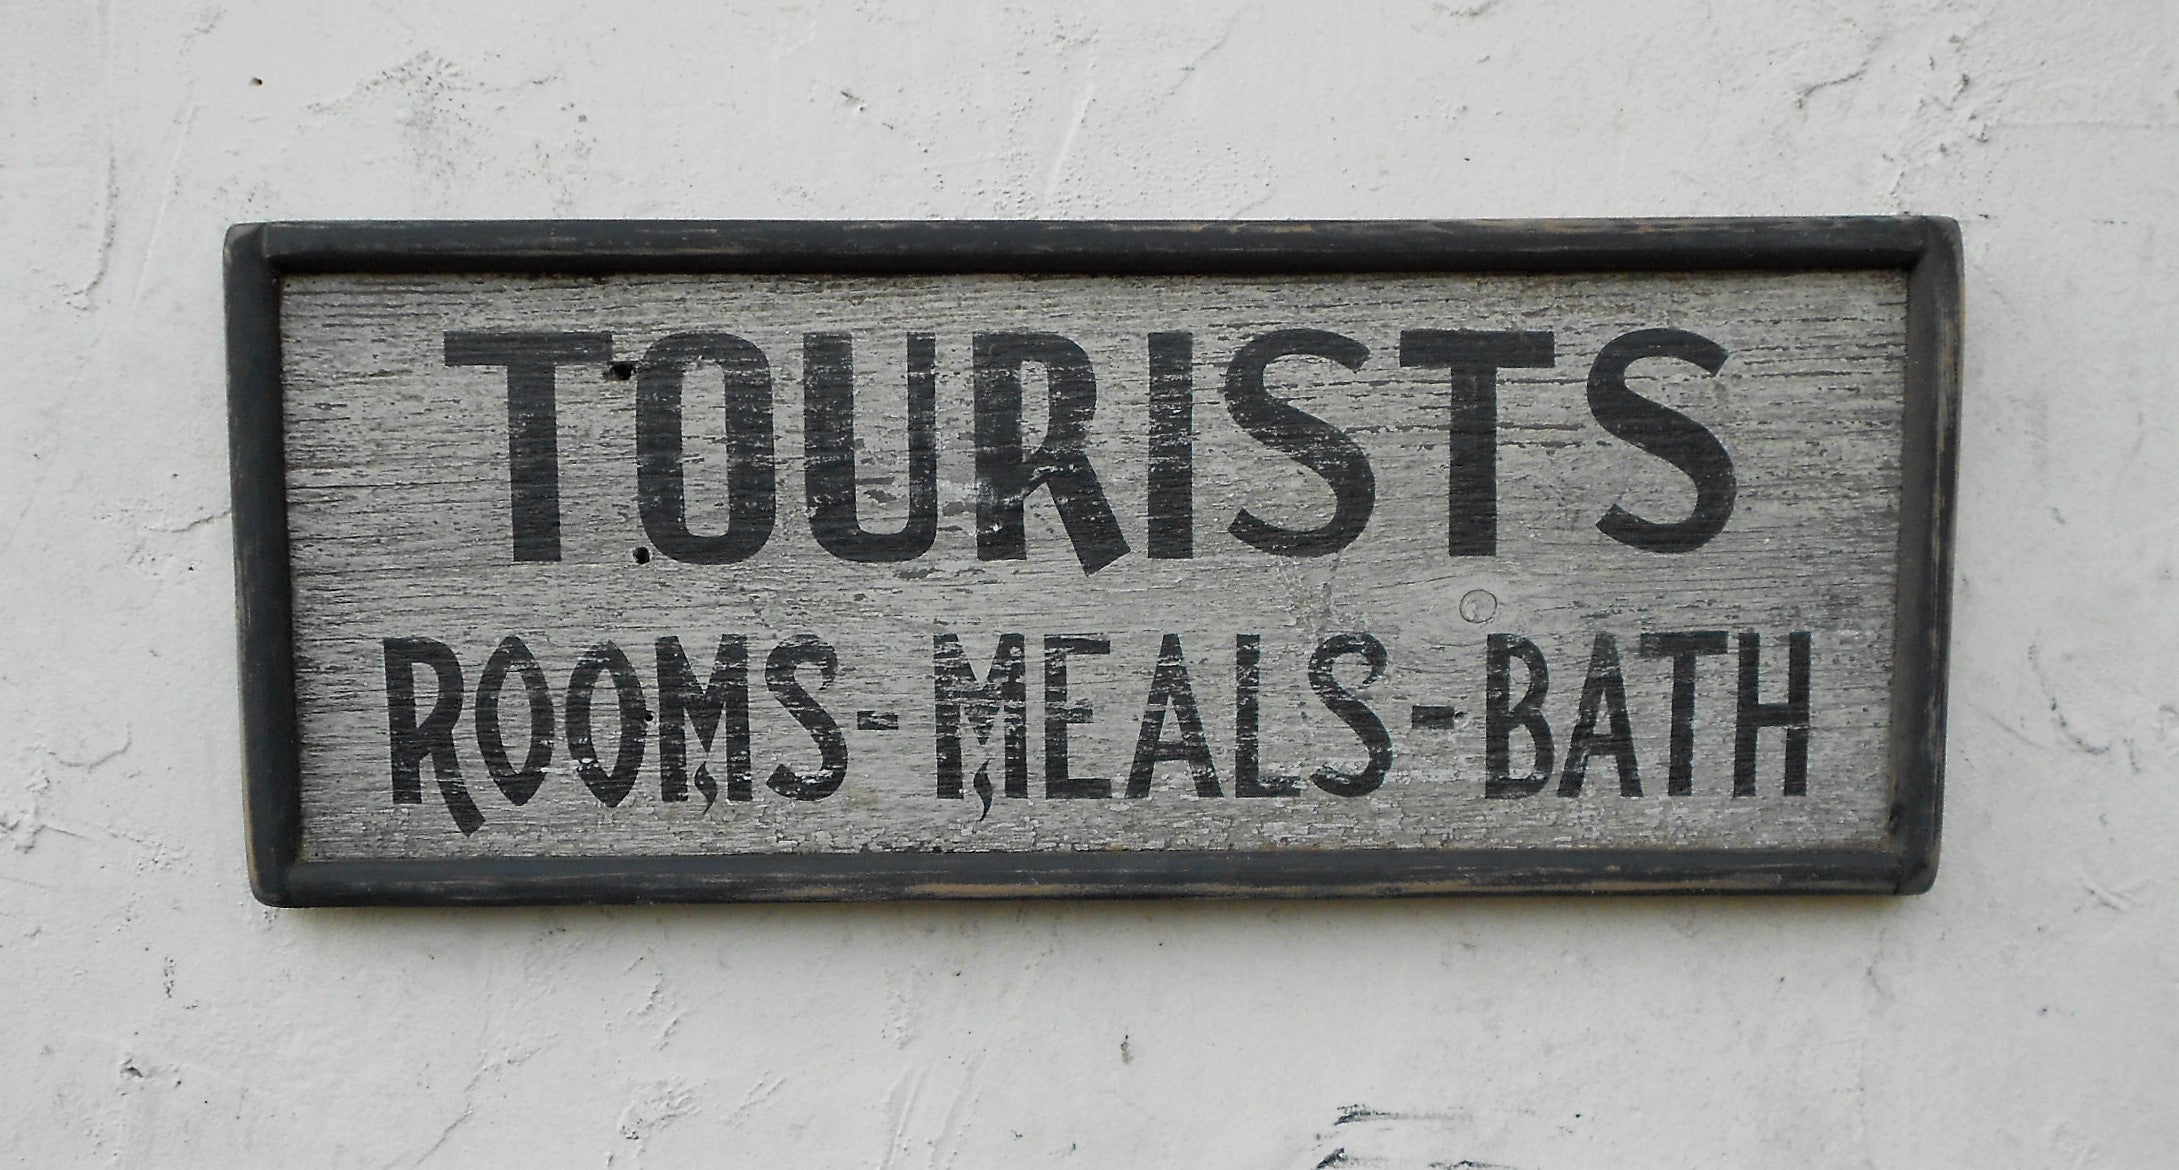 Tourists, Rooms-Meal-Baths